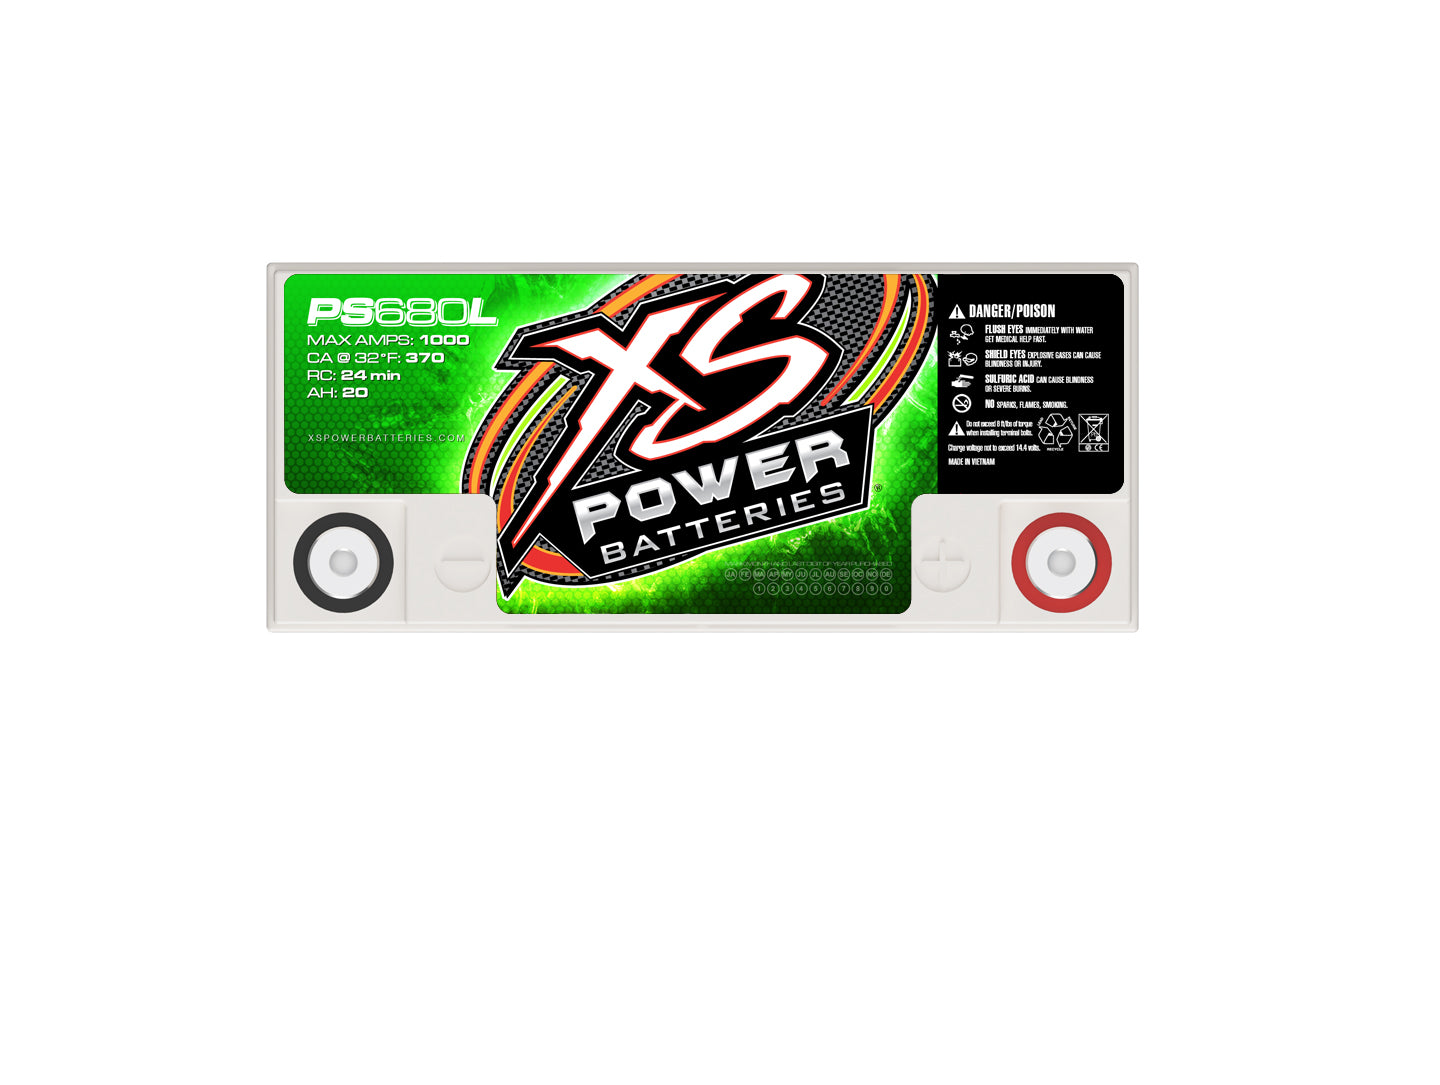 PS680L XS Power 12VDC AGM Powersports Vehicle Battery 1000A 20Ah